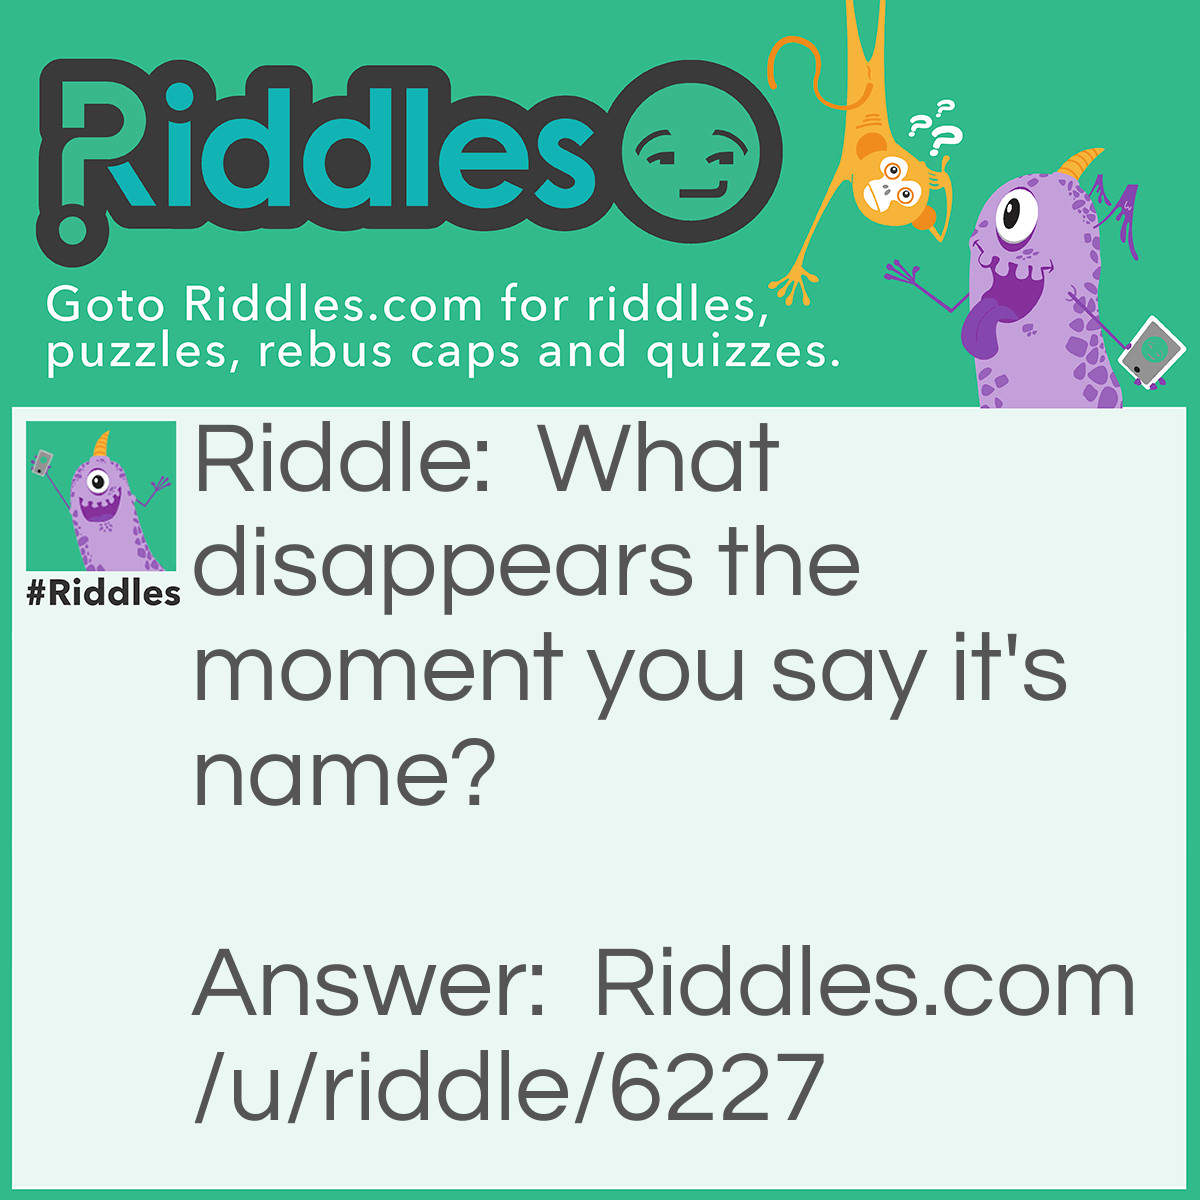 Riddle: What disappears the moment you say it's name? Answer: Silence.